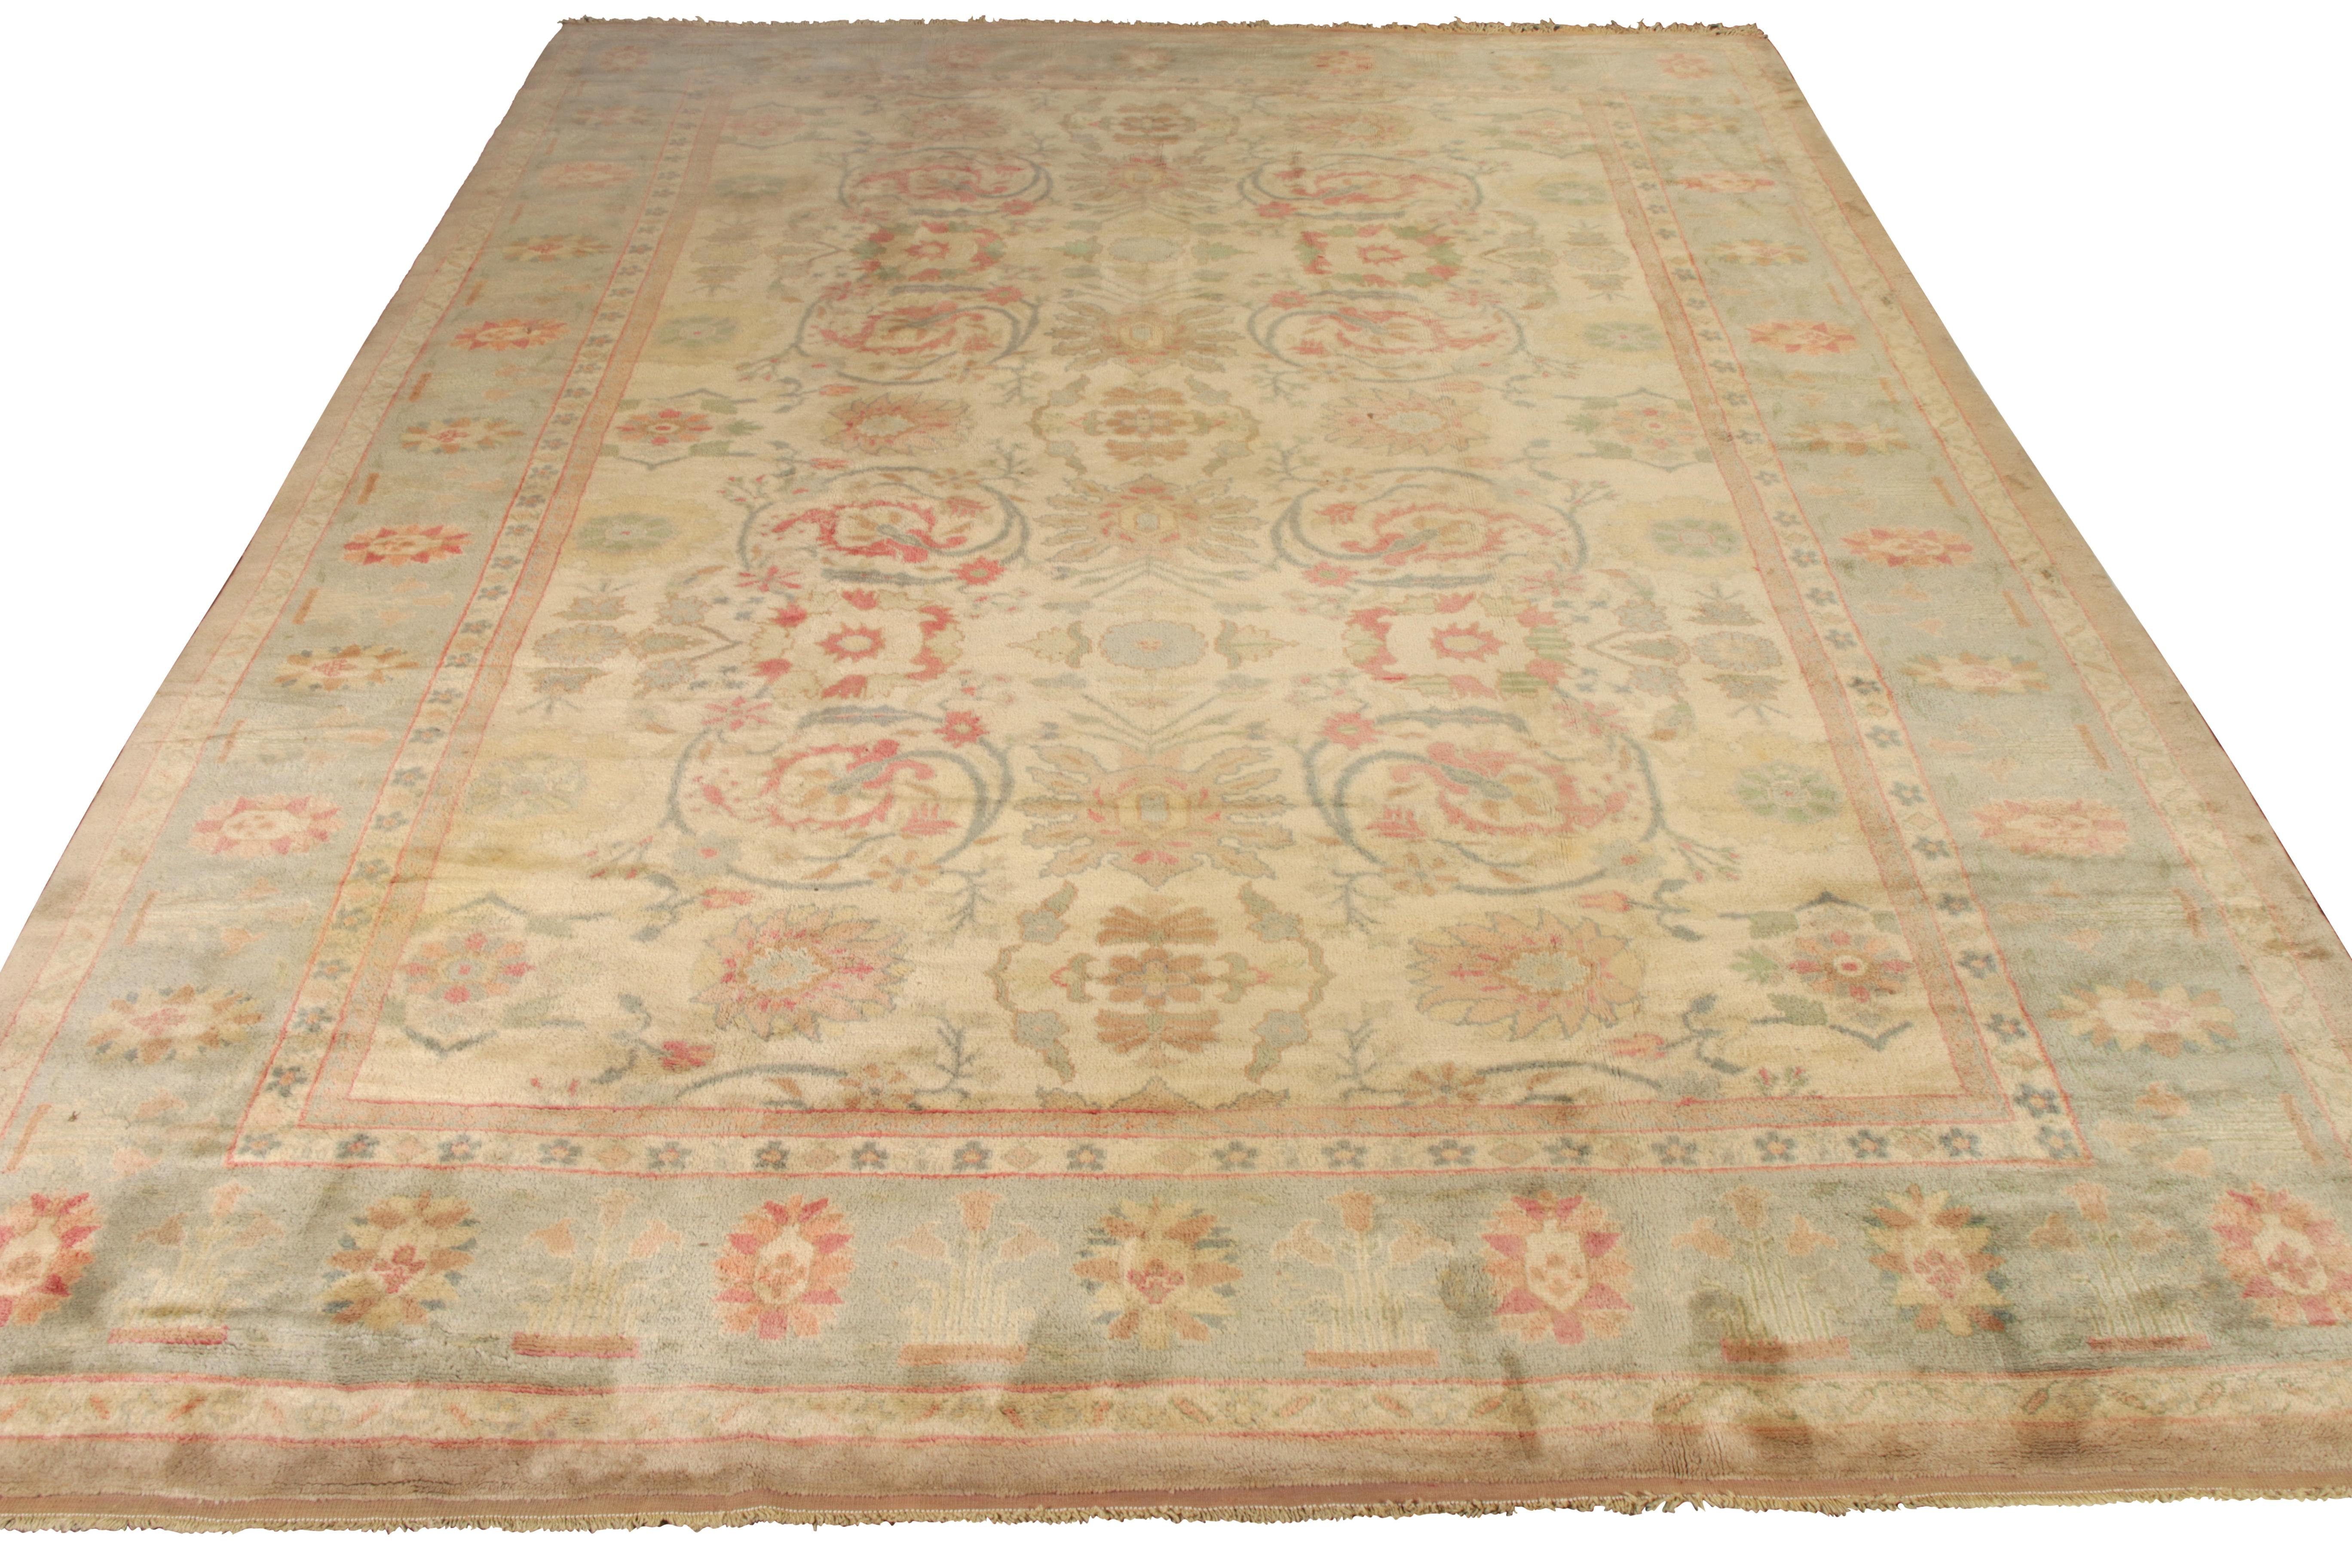 Hand knotted in wool originating circa 1970-1980, this 13 x 17 vintage rug from the Modern Classics Collection celebrates an Oushak rug style of renown in blue, green, and pink floral accents against the comfortable beige-brown background.

On the